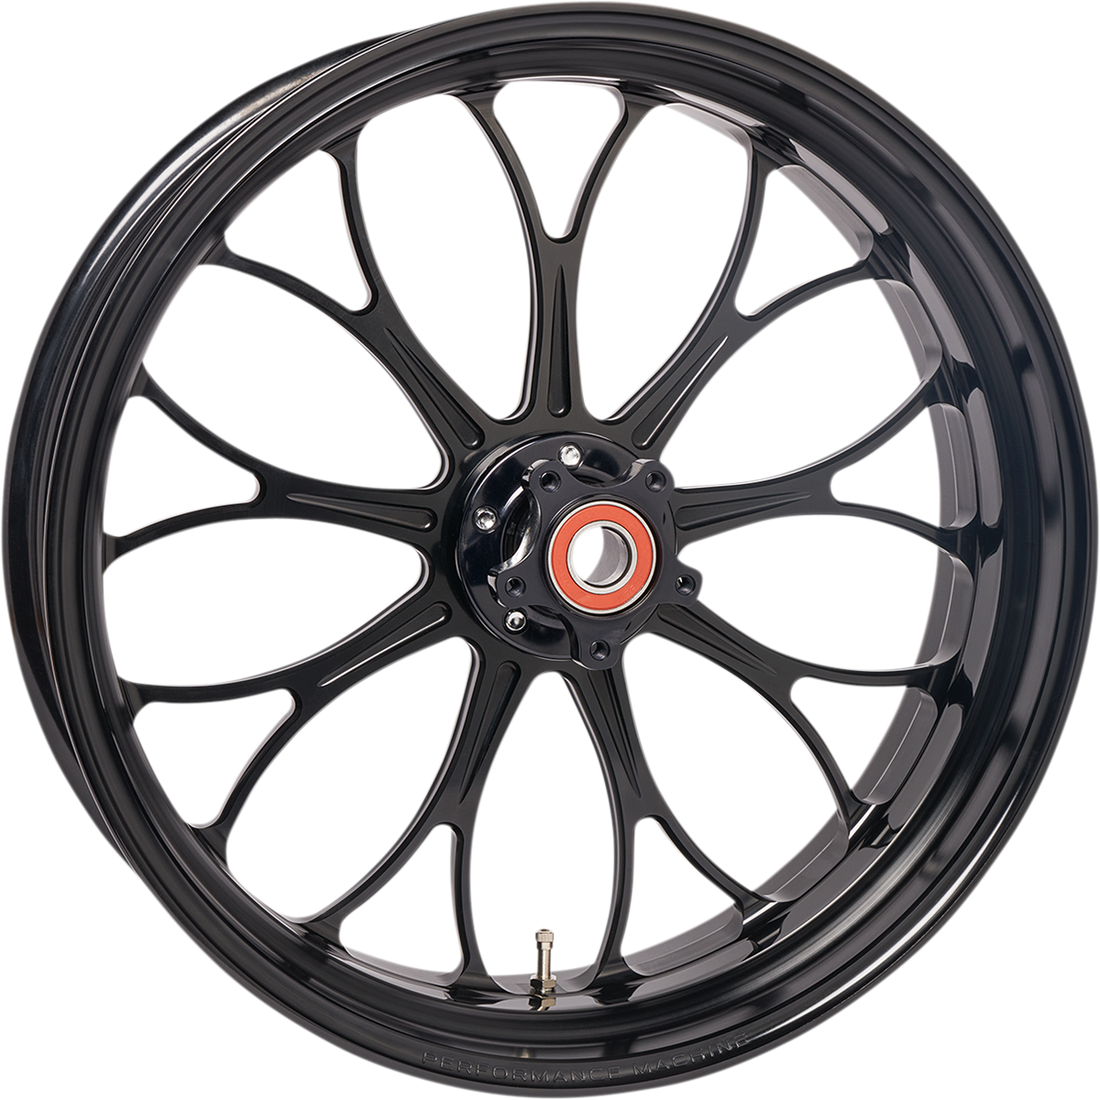 0201-2380 - PERFORMANCE MACHINE (PM) Wheel - Revolution - Dual Disc - Front - Black Ops* - 18"x5.50" - With ABS 12047814RRVNAPB